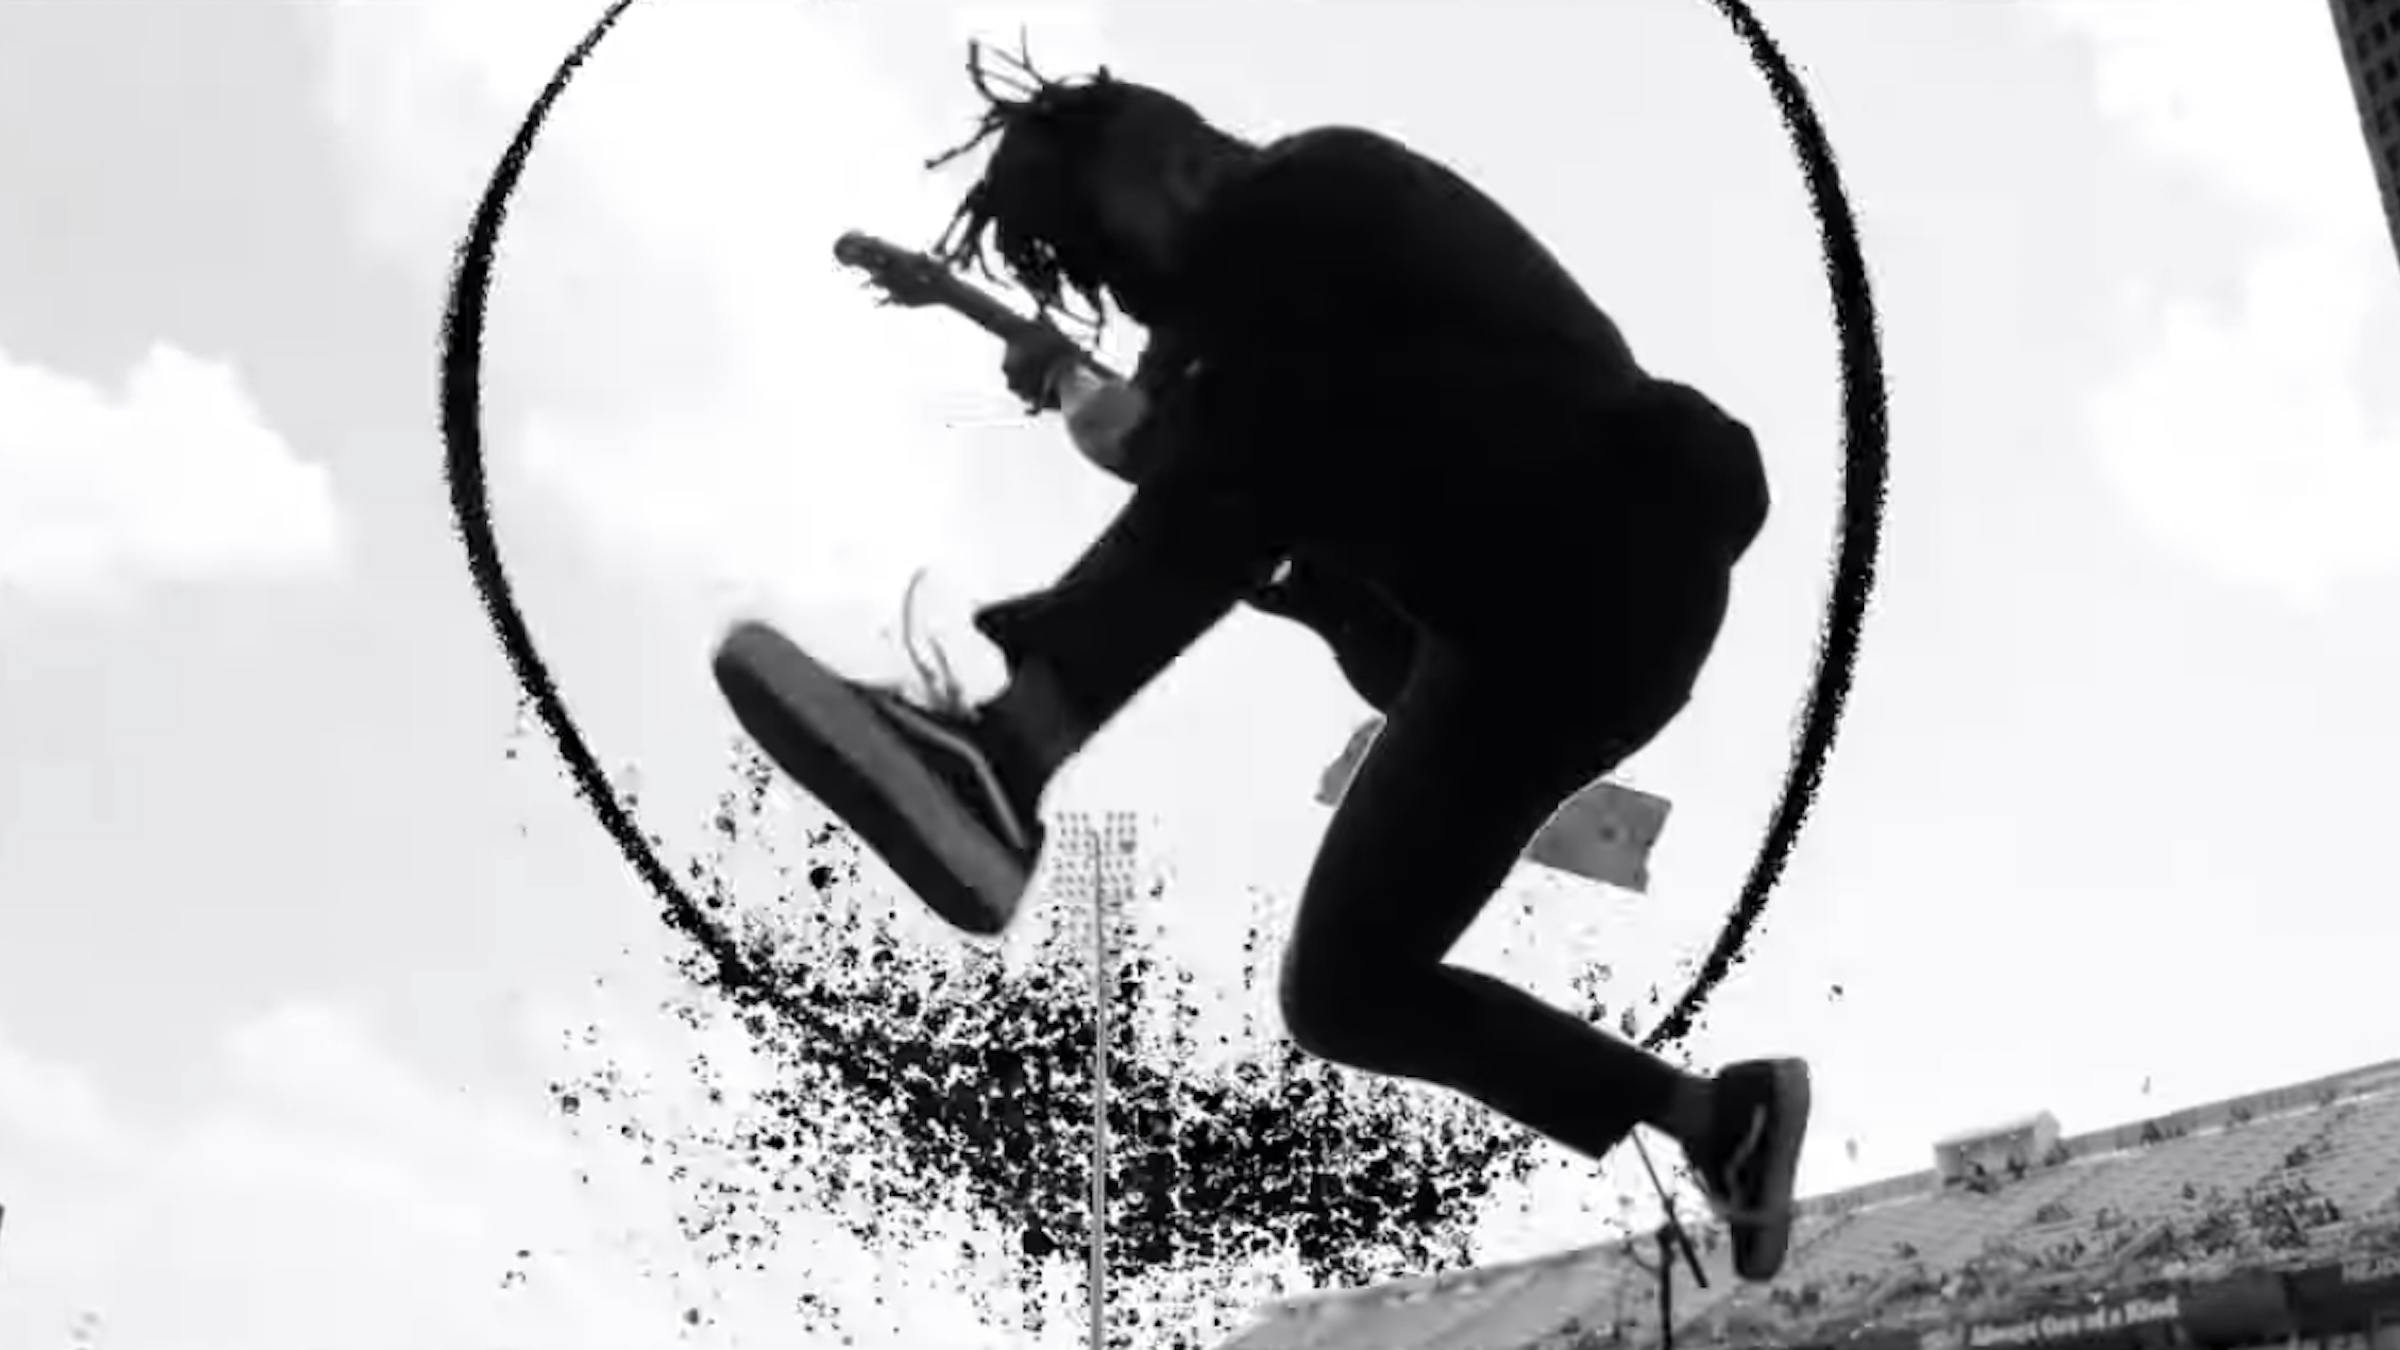 FEVER 333 Release New Stream-Of-Consciousness Video For Animal